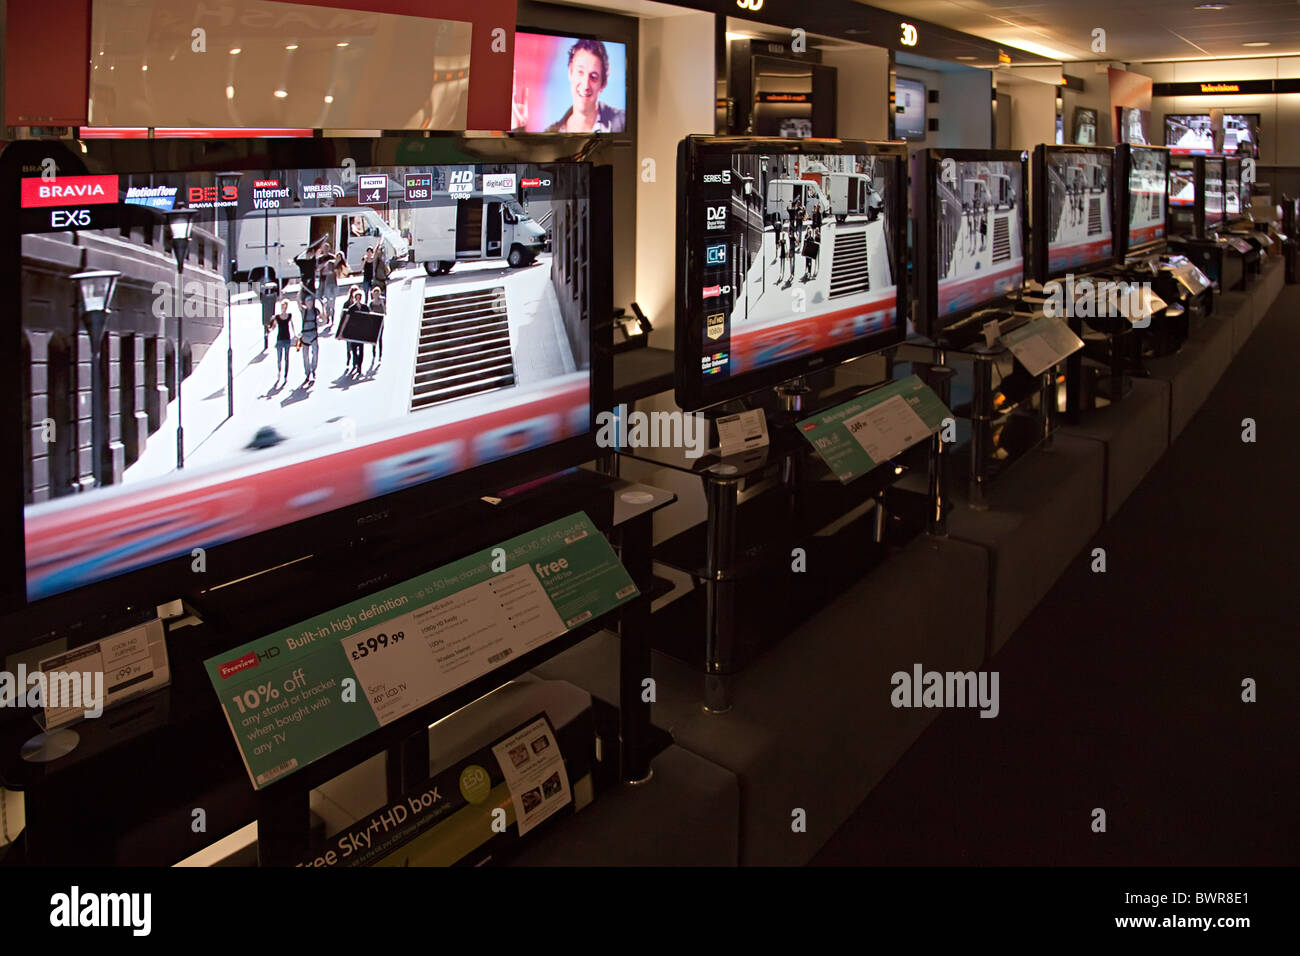 Digital flat screen televisions on sale in Comet, Cwmbran, Wales UK Stock Photo